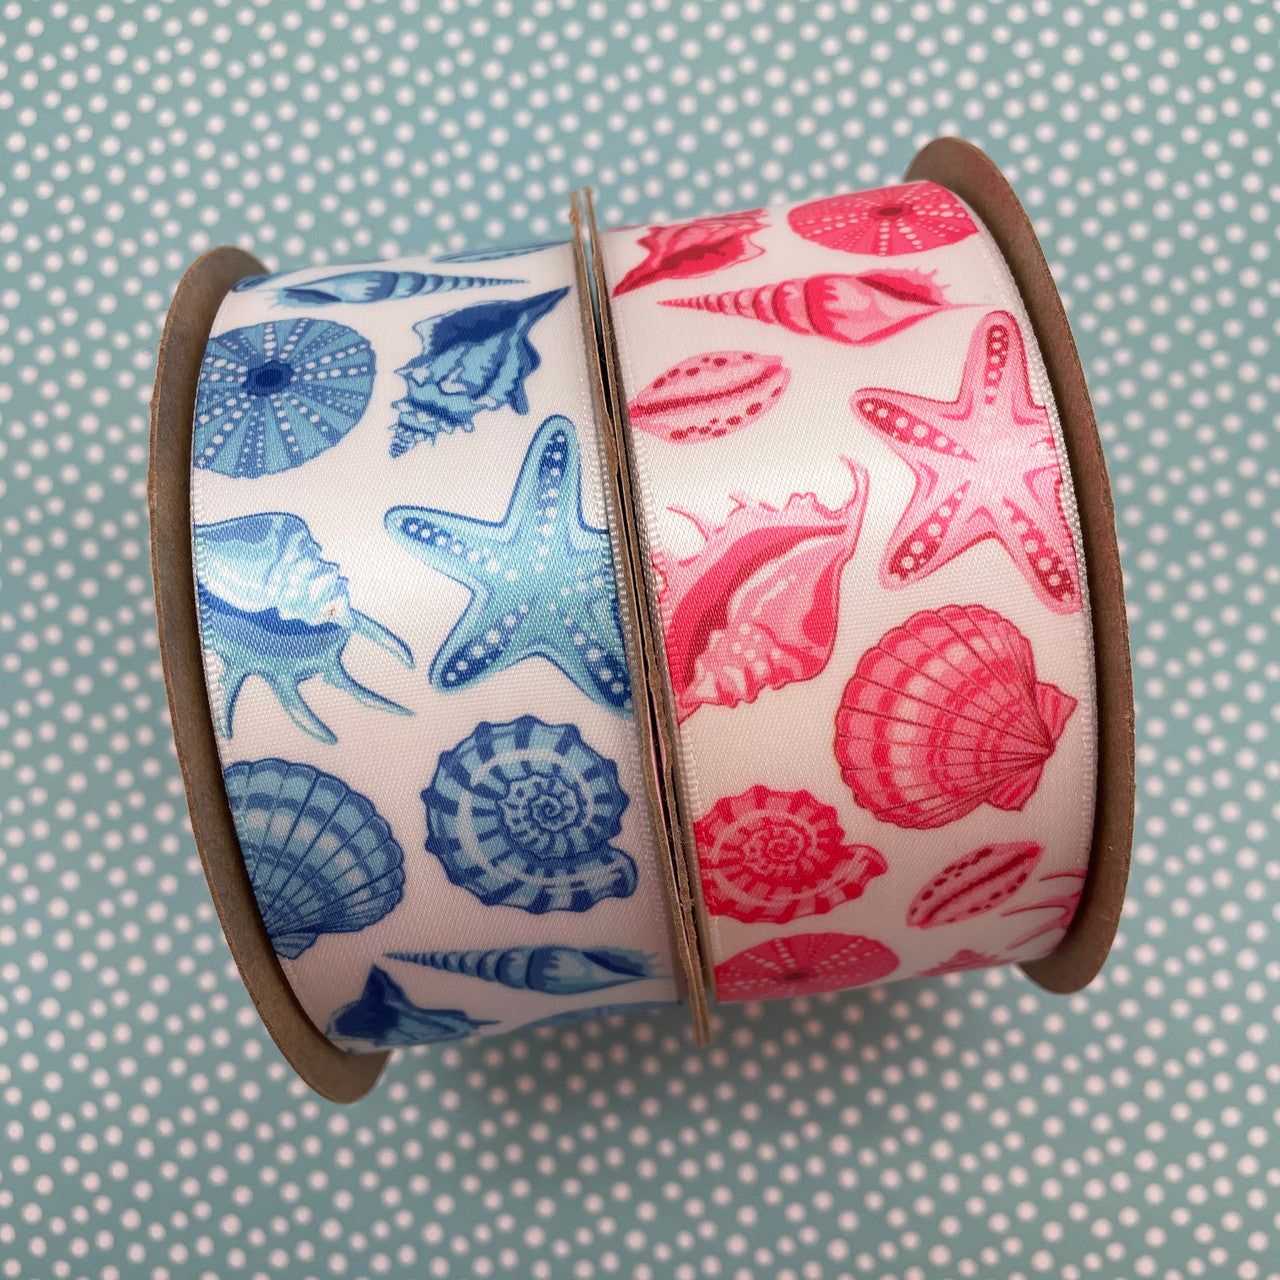 Our seashell ribbon comes in pink and blue! Pick a color theme for your project and we have you covered!